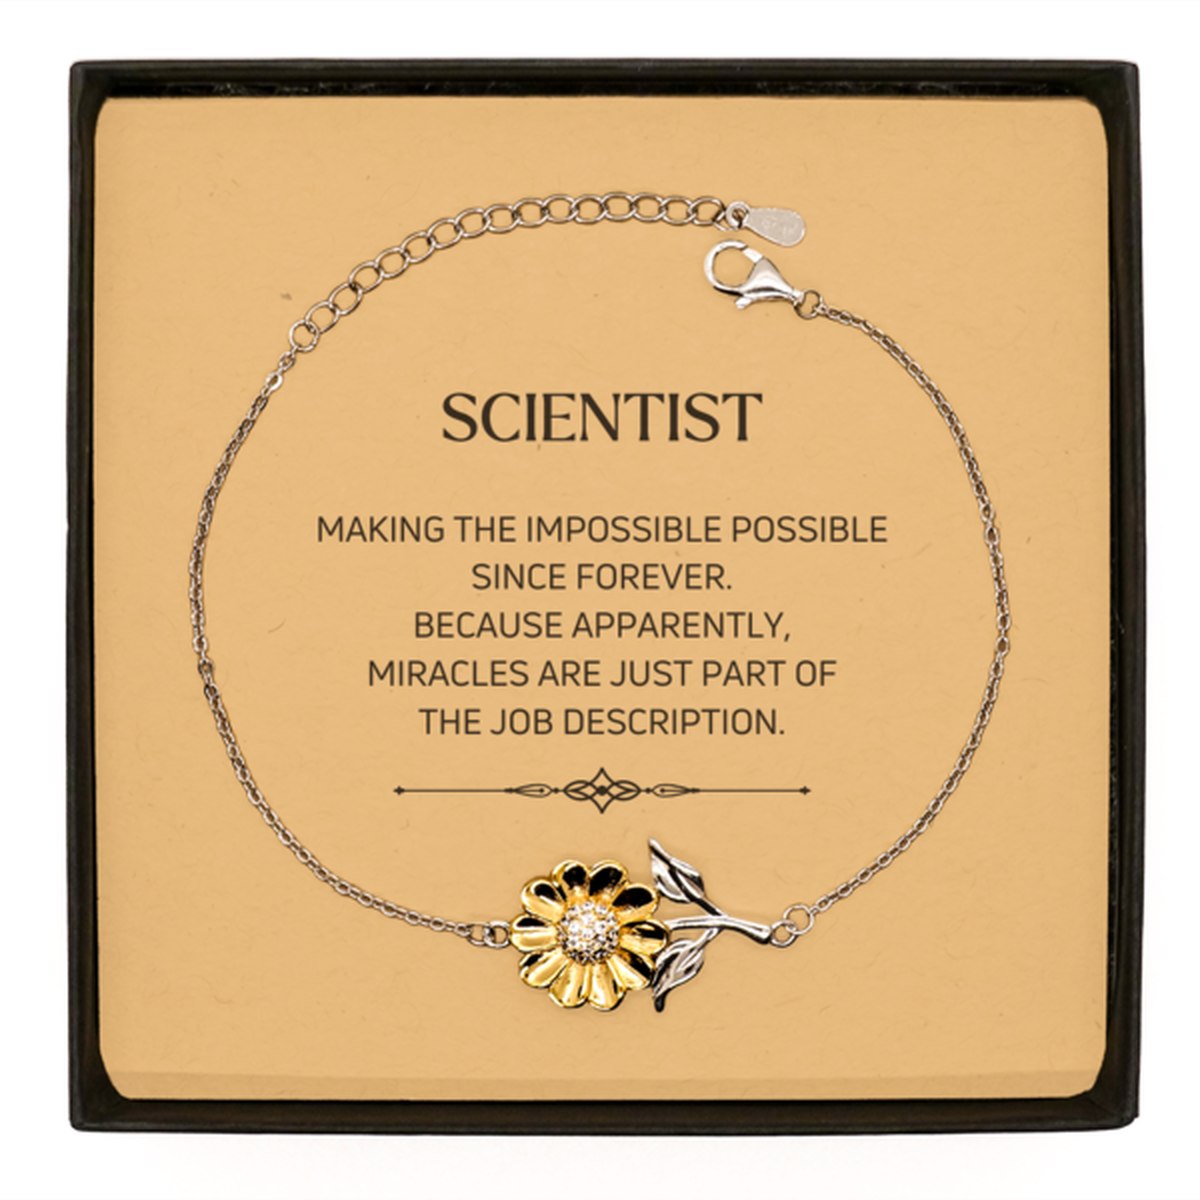 Funny Scientist Gifts, Miracles are just part of the job description, Inspirational Birthday Sunflower Bracelet For Scientist, Men, Women, Coworkers, Friends, Boss